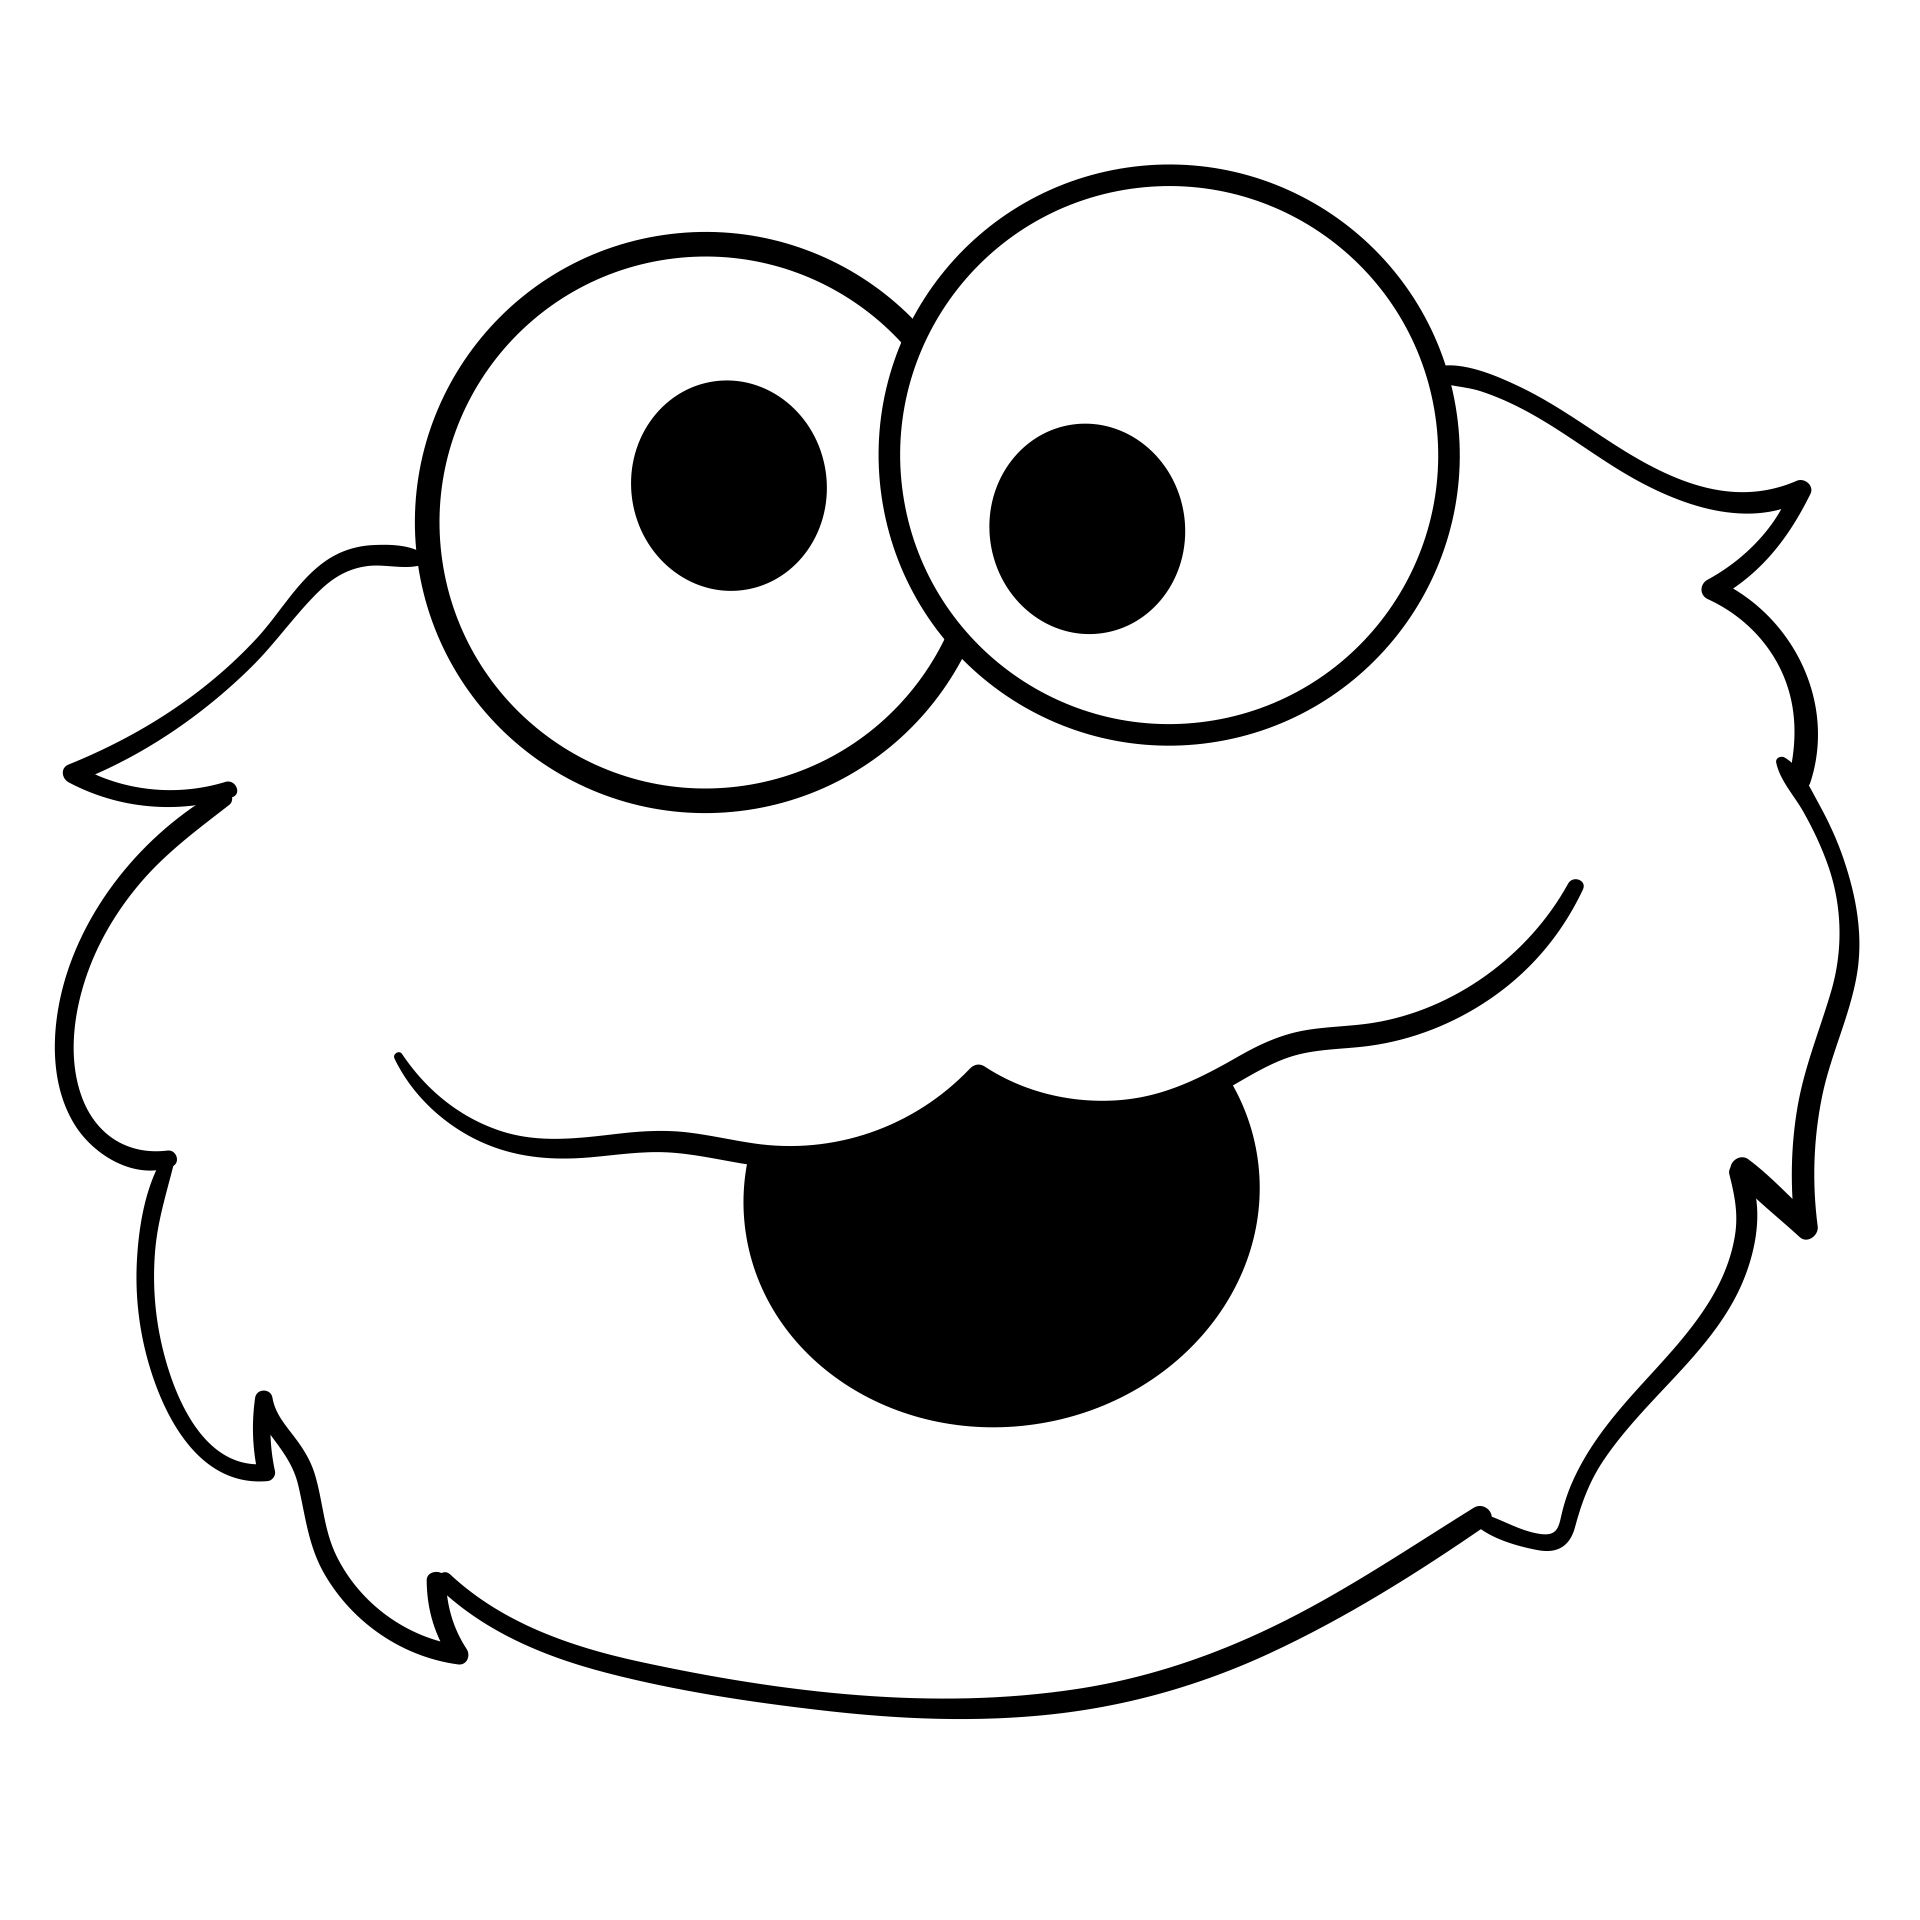 Cookie Monster Face Template Printable - Free Printable Templates